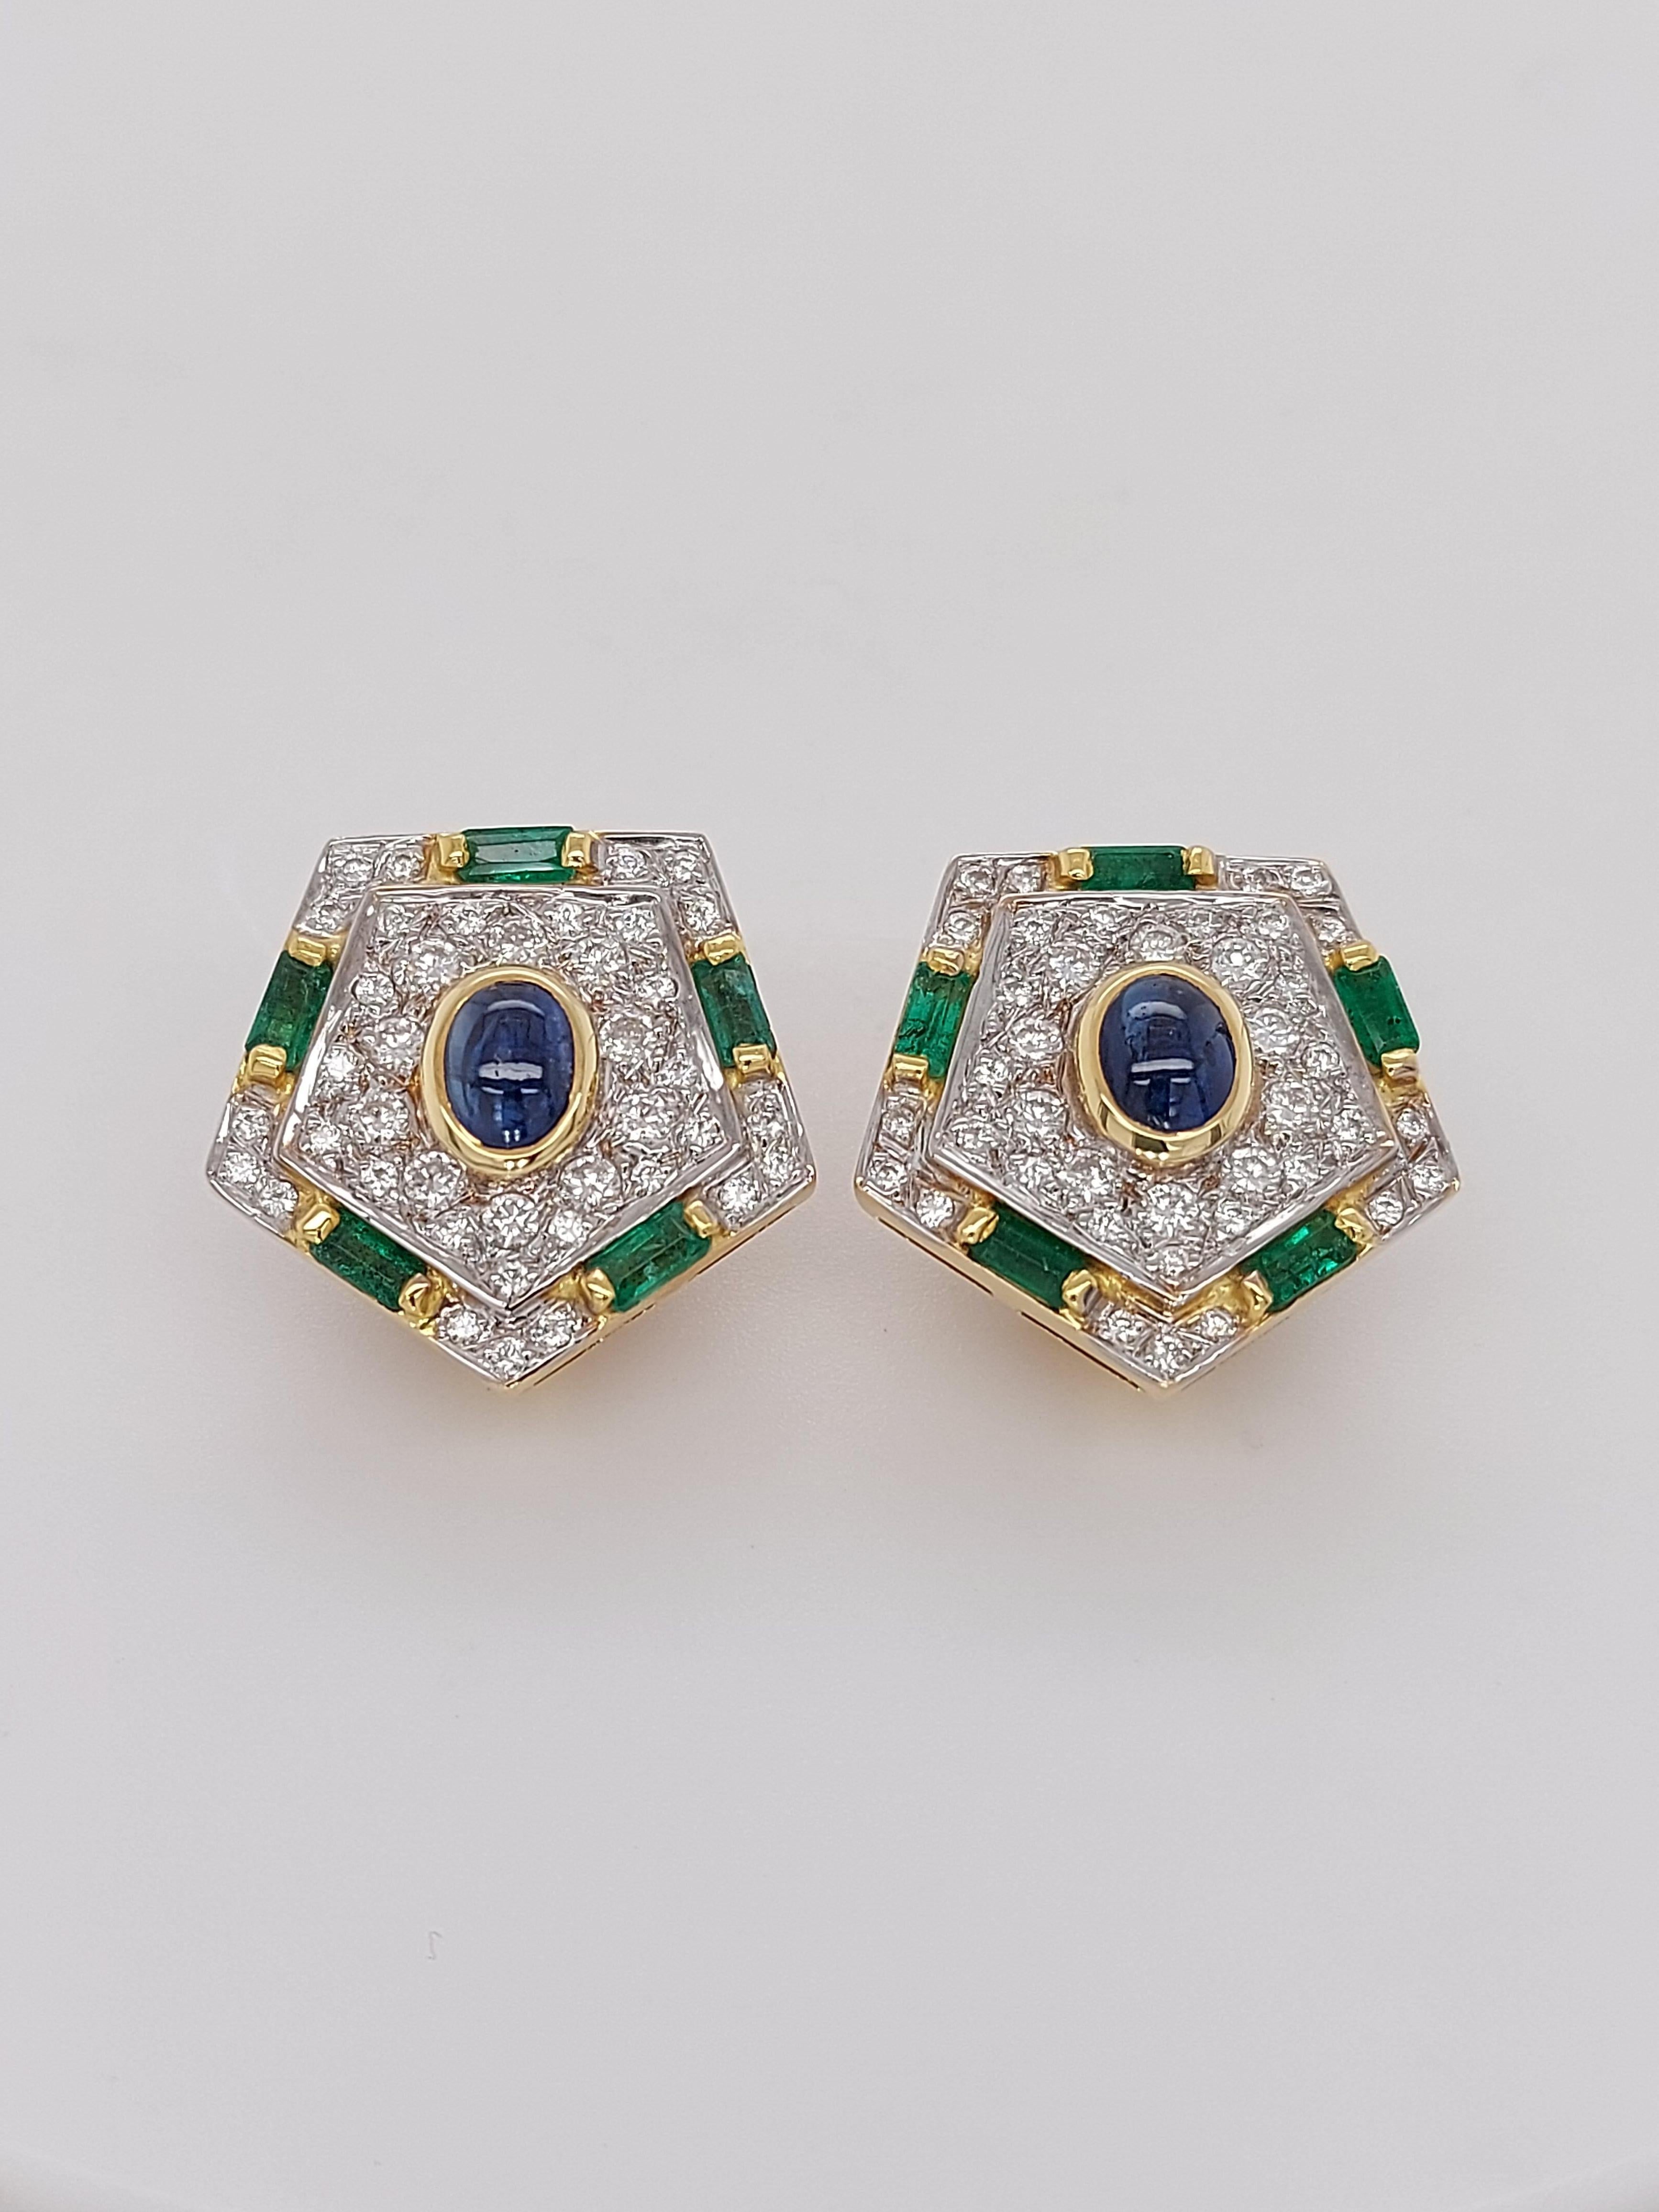 Luxurious Gold Clip-On Earrings With Diamonds, Emerald and Cabochon Sapphire For Sale 4